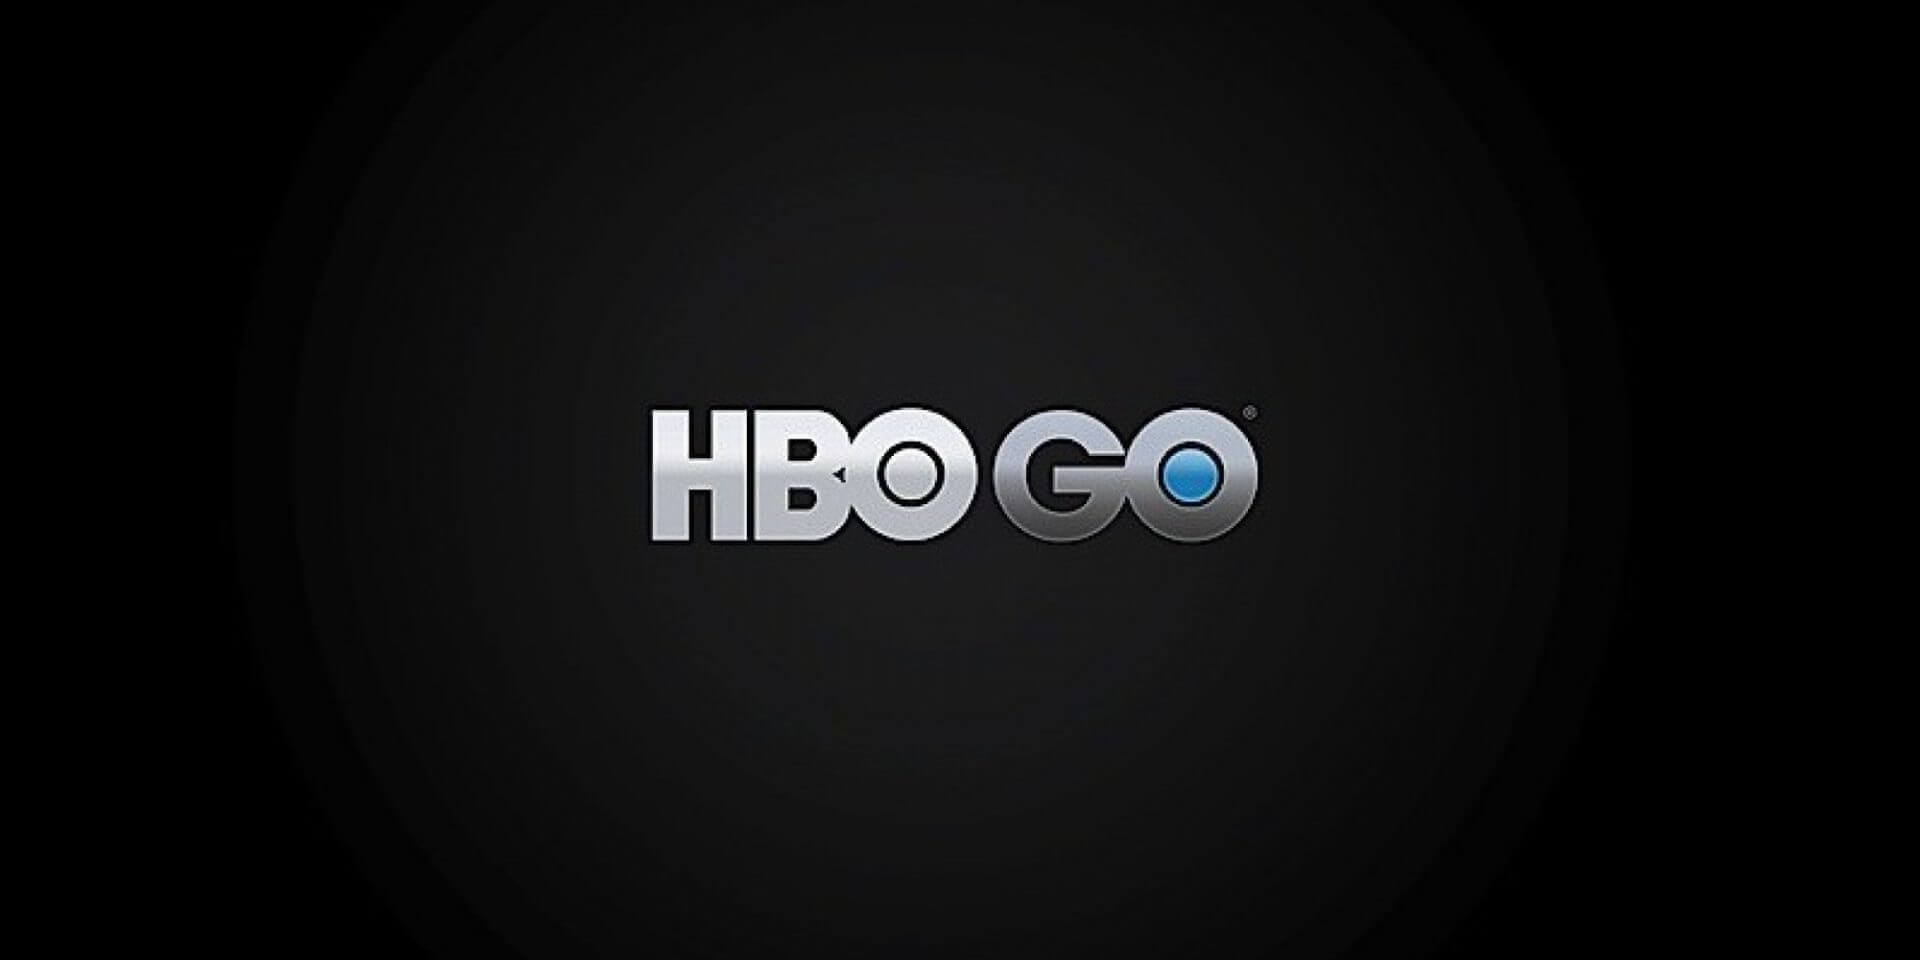 Sling TV and HBO have announced that HBO Go will be available for Xbox One users in time for the newest season of Game of Thrones.